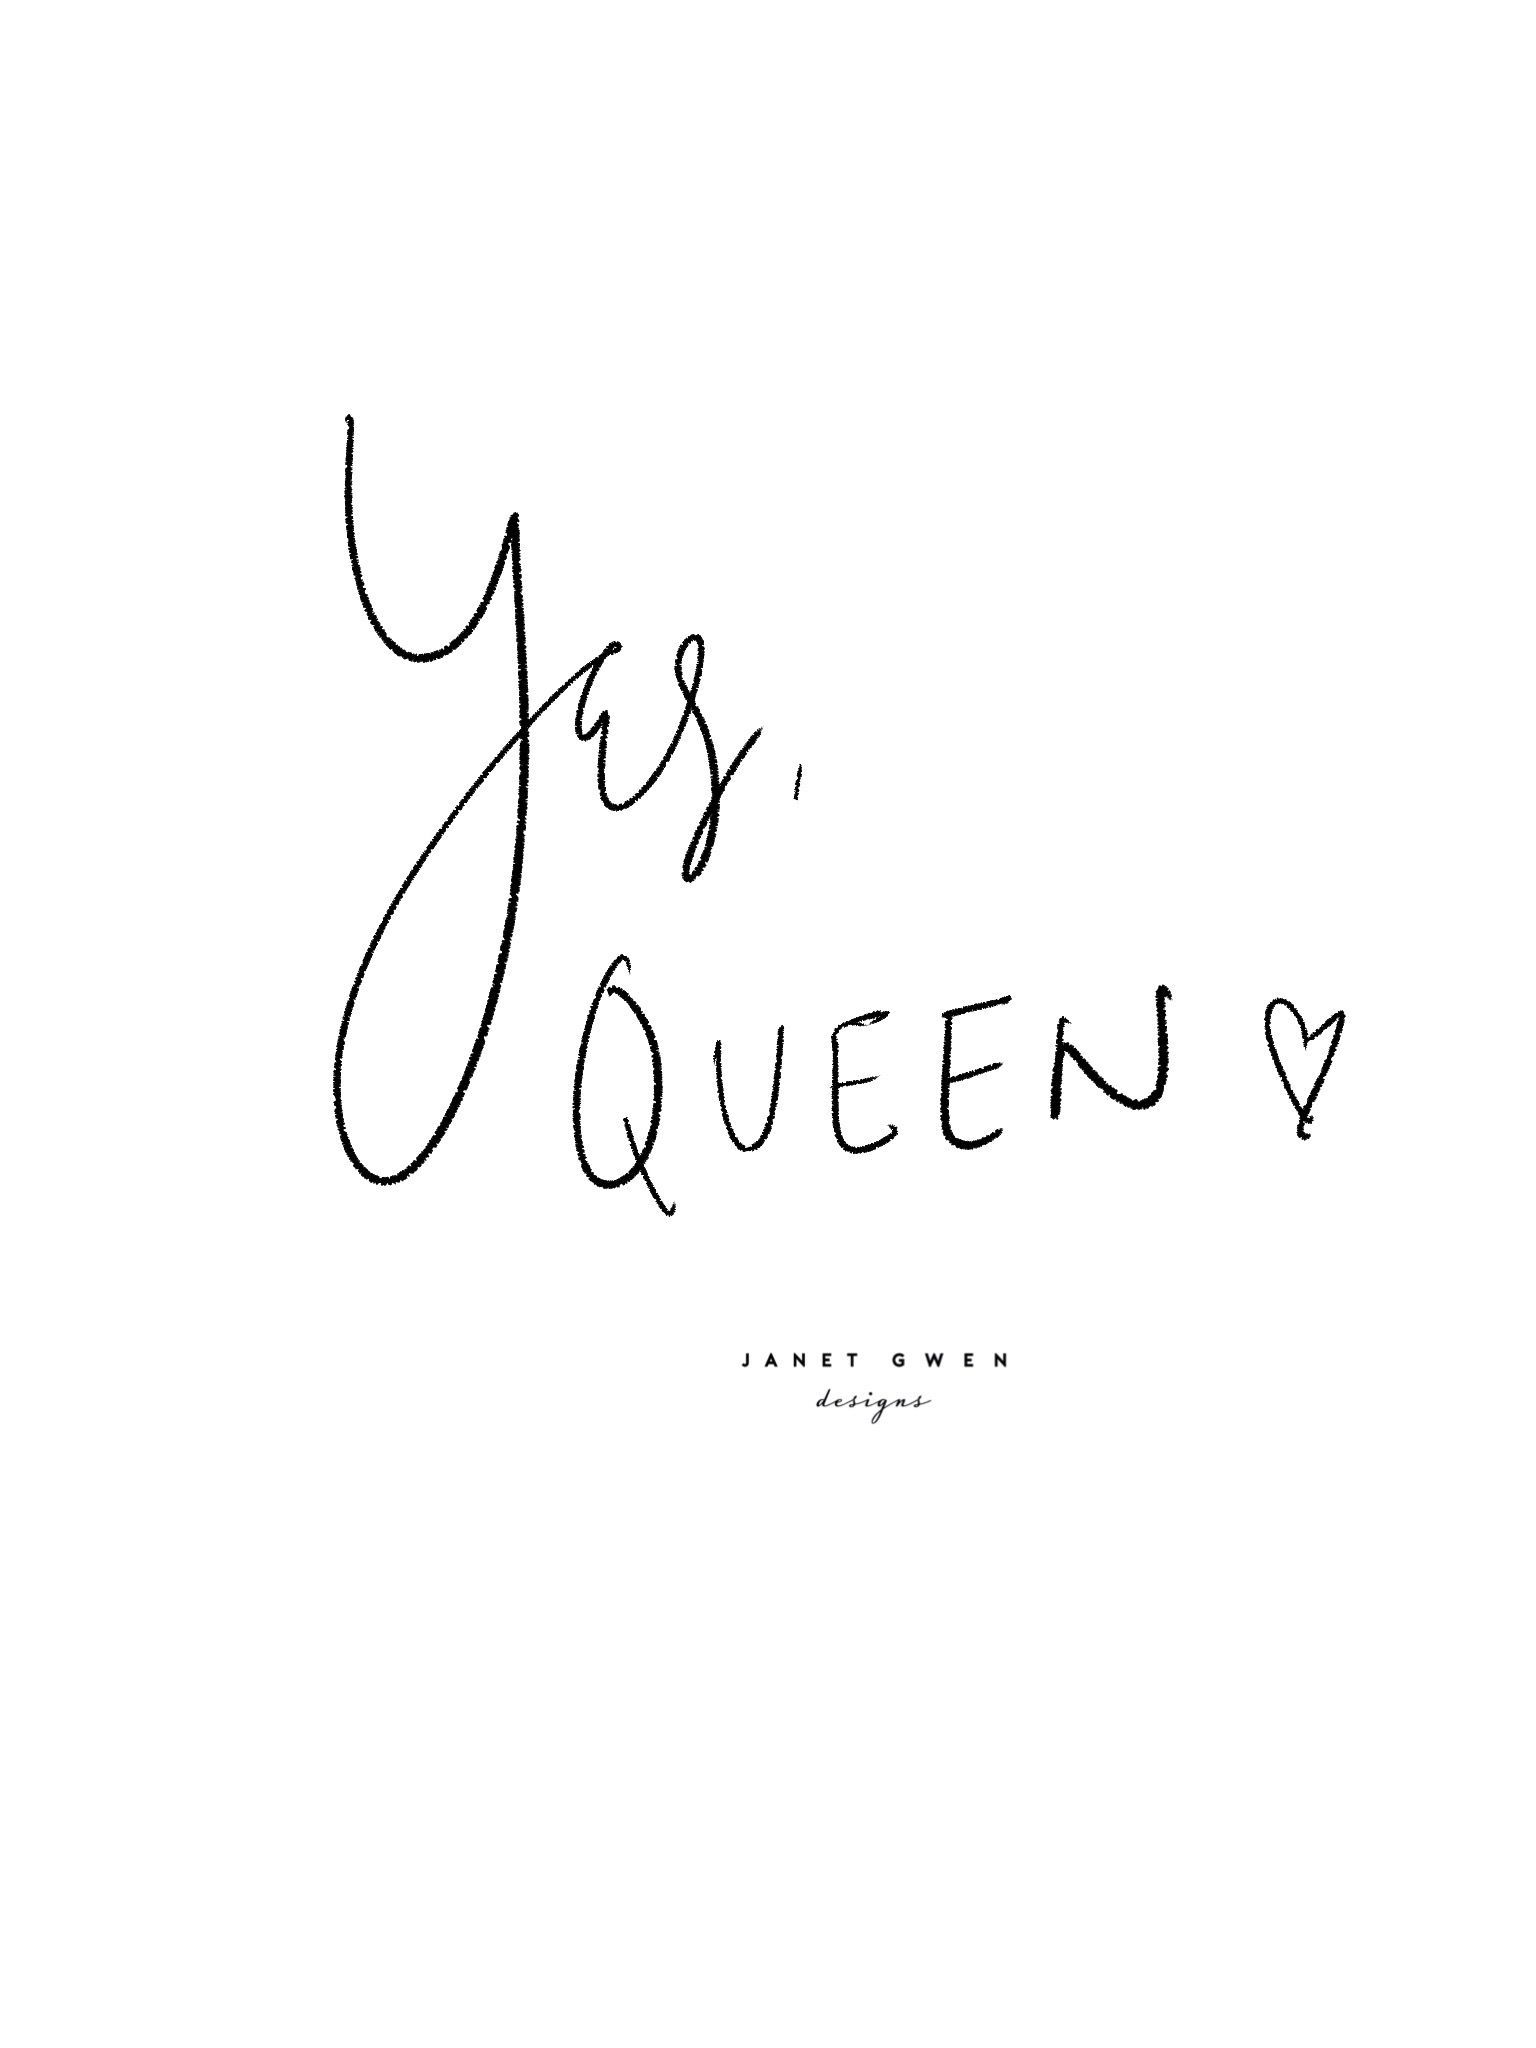 Queen Quotes Wallpaper Free Queen Quotes Background